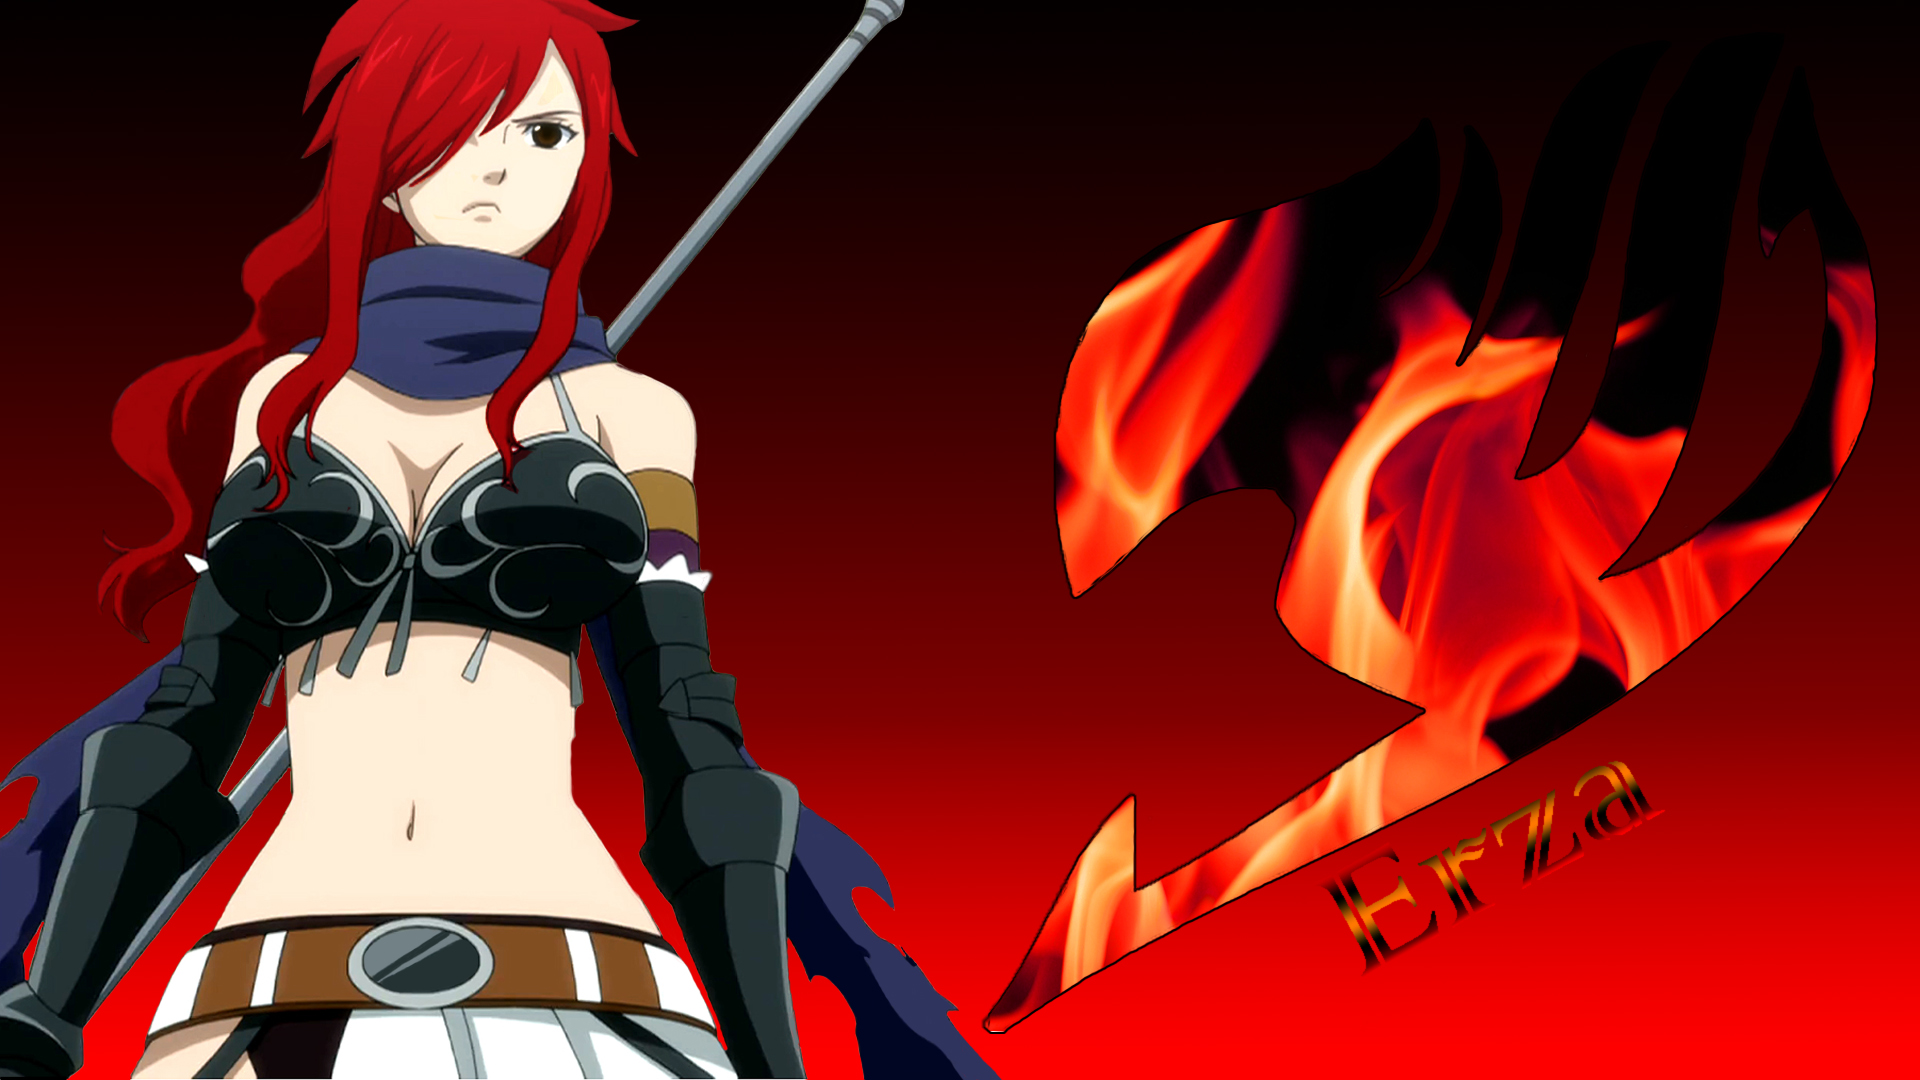 hinh nen fairy tail 21 - wallpaper free download